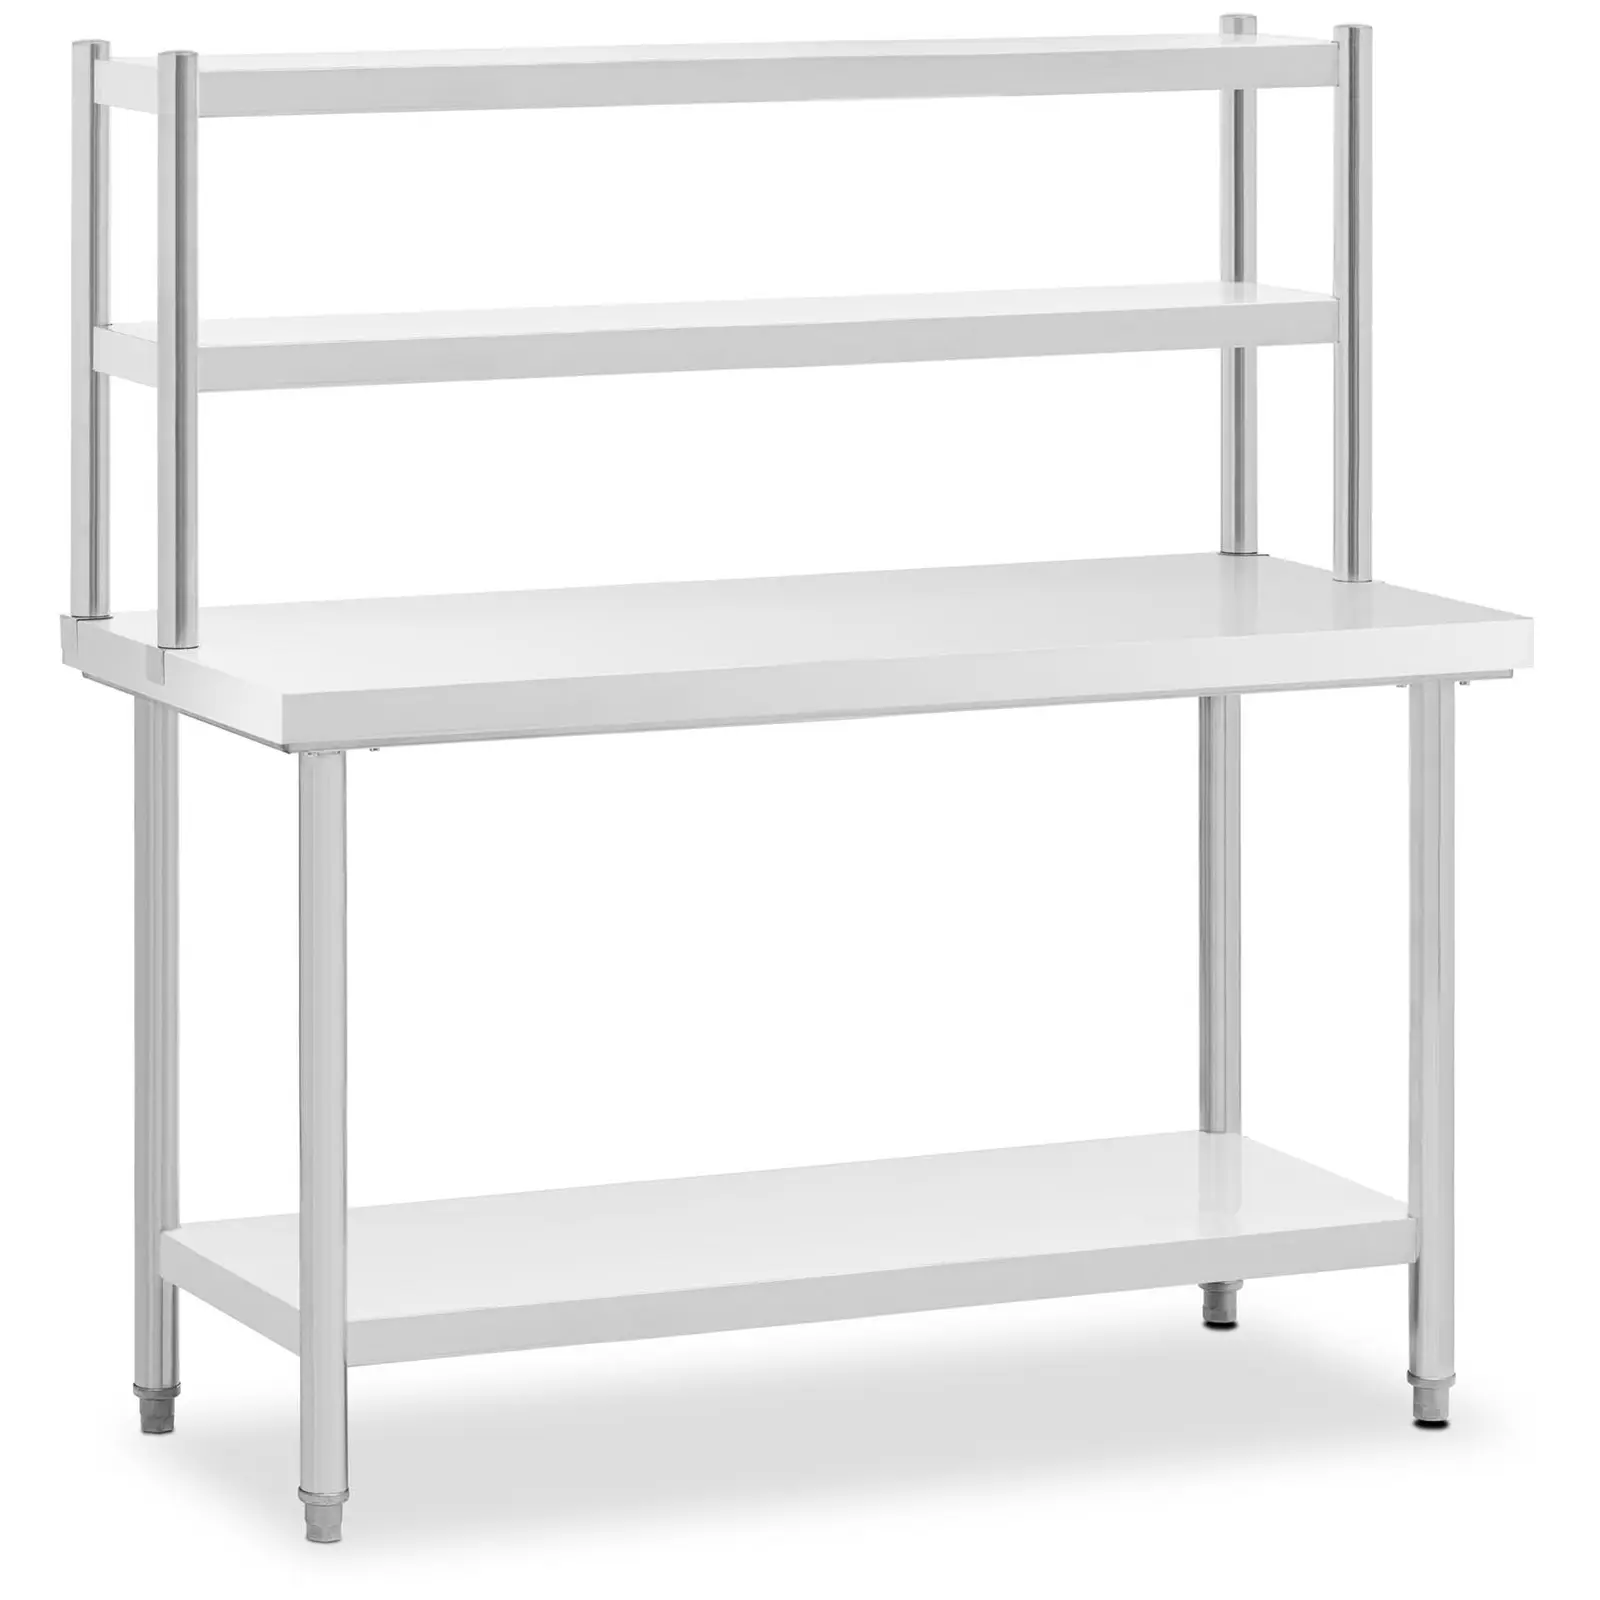 Stainless Steel Table With Shelves - 150 x 60 cm - 300 kg - Royal Catering